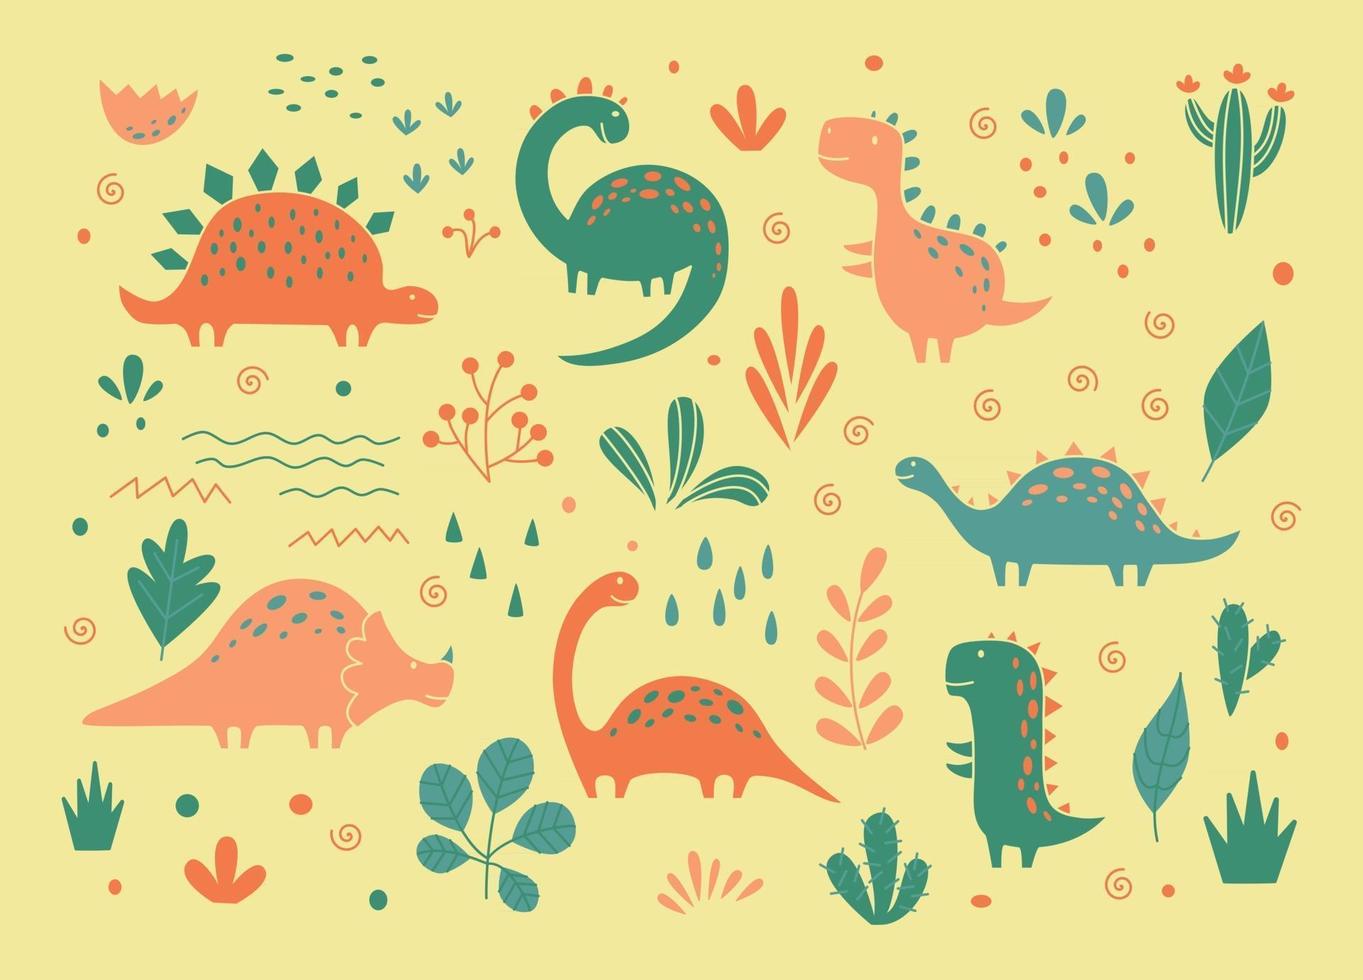 Cute dinosaurs and tropic plants in outline sketchy style. Funny cartoon dino set. Hand drawn vector doodle set for kids